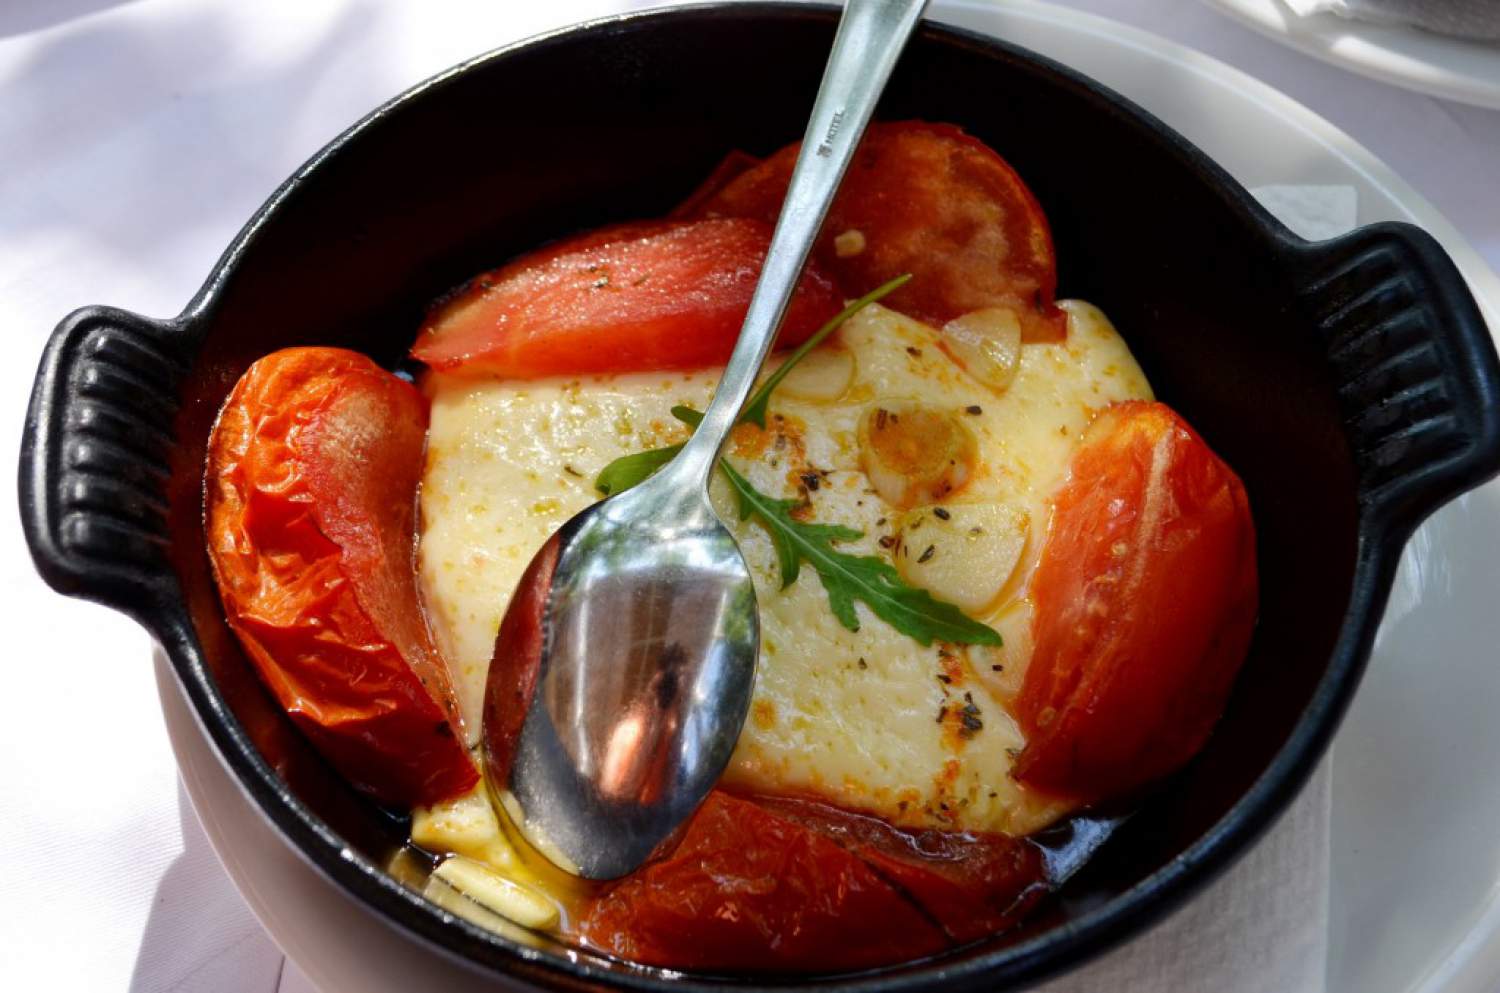 Cheese and tomatoes